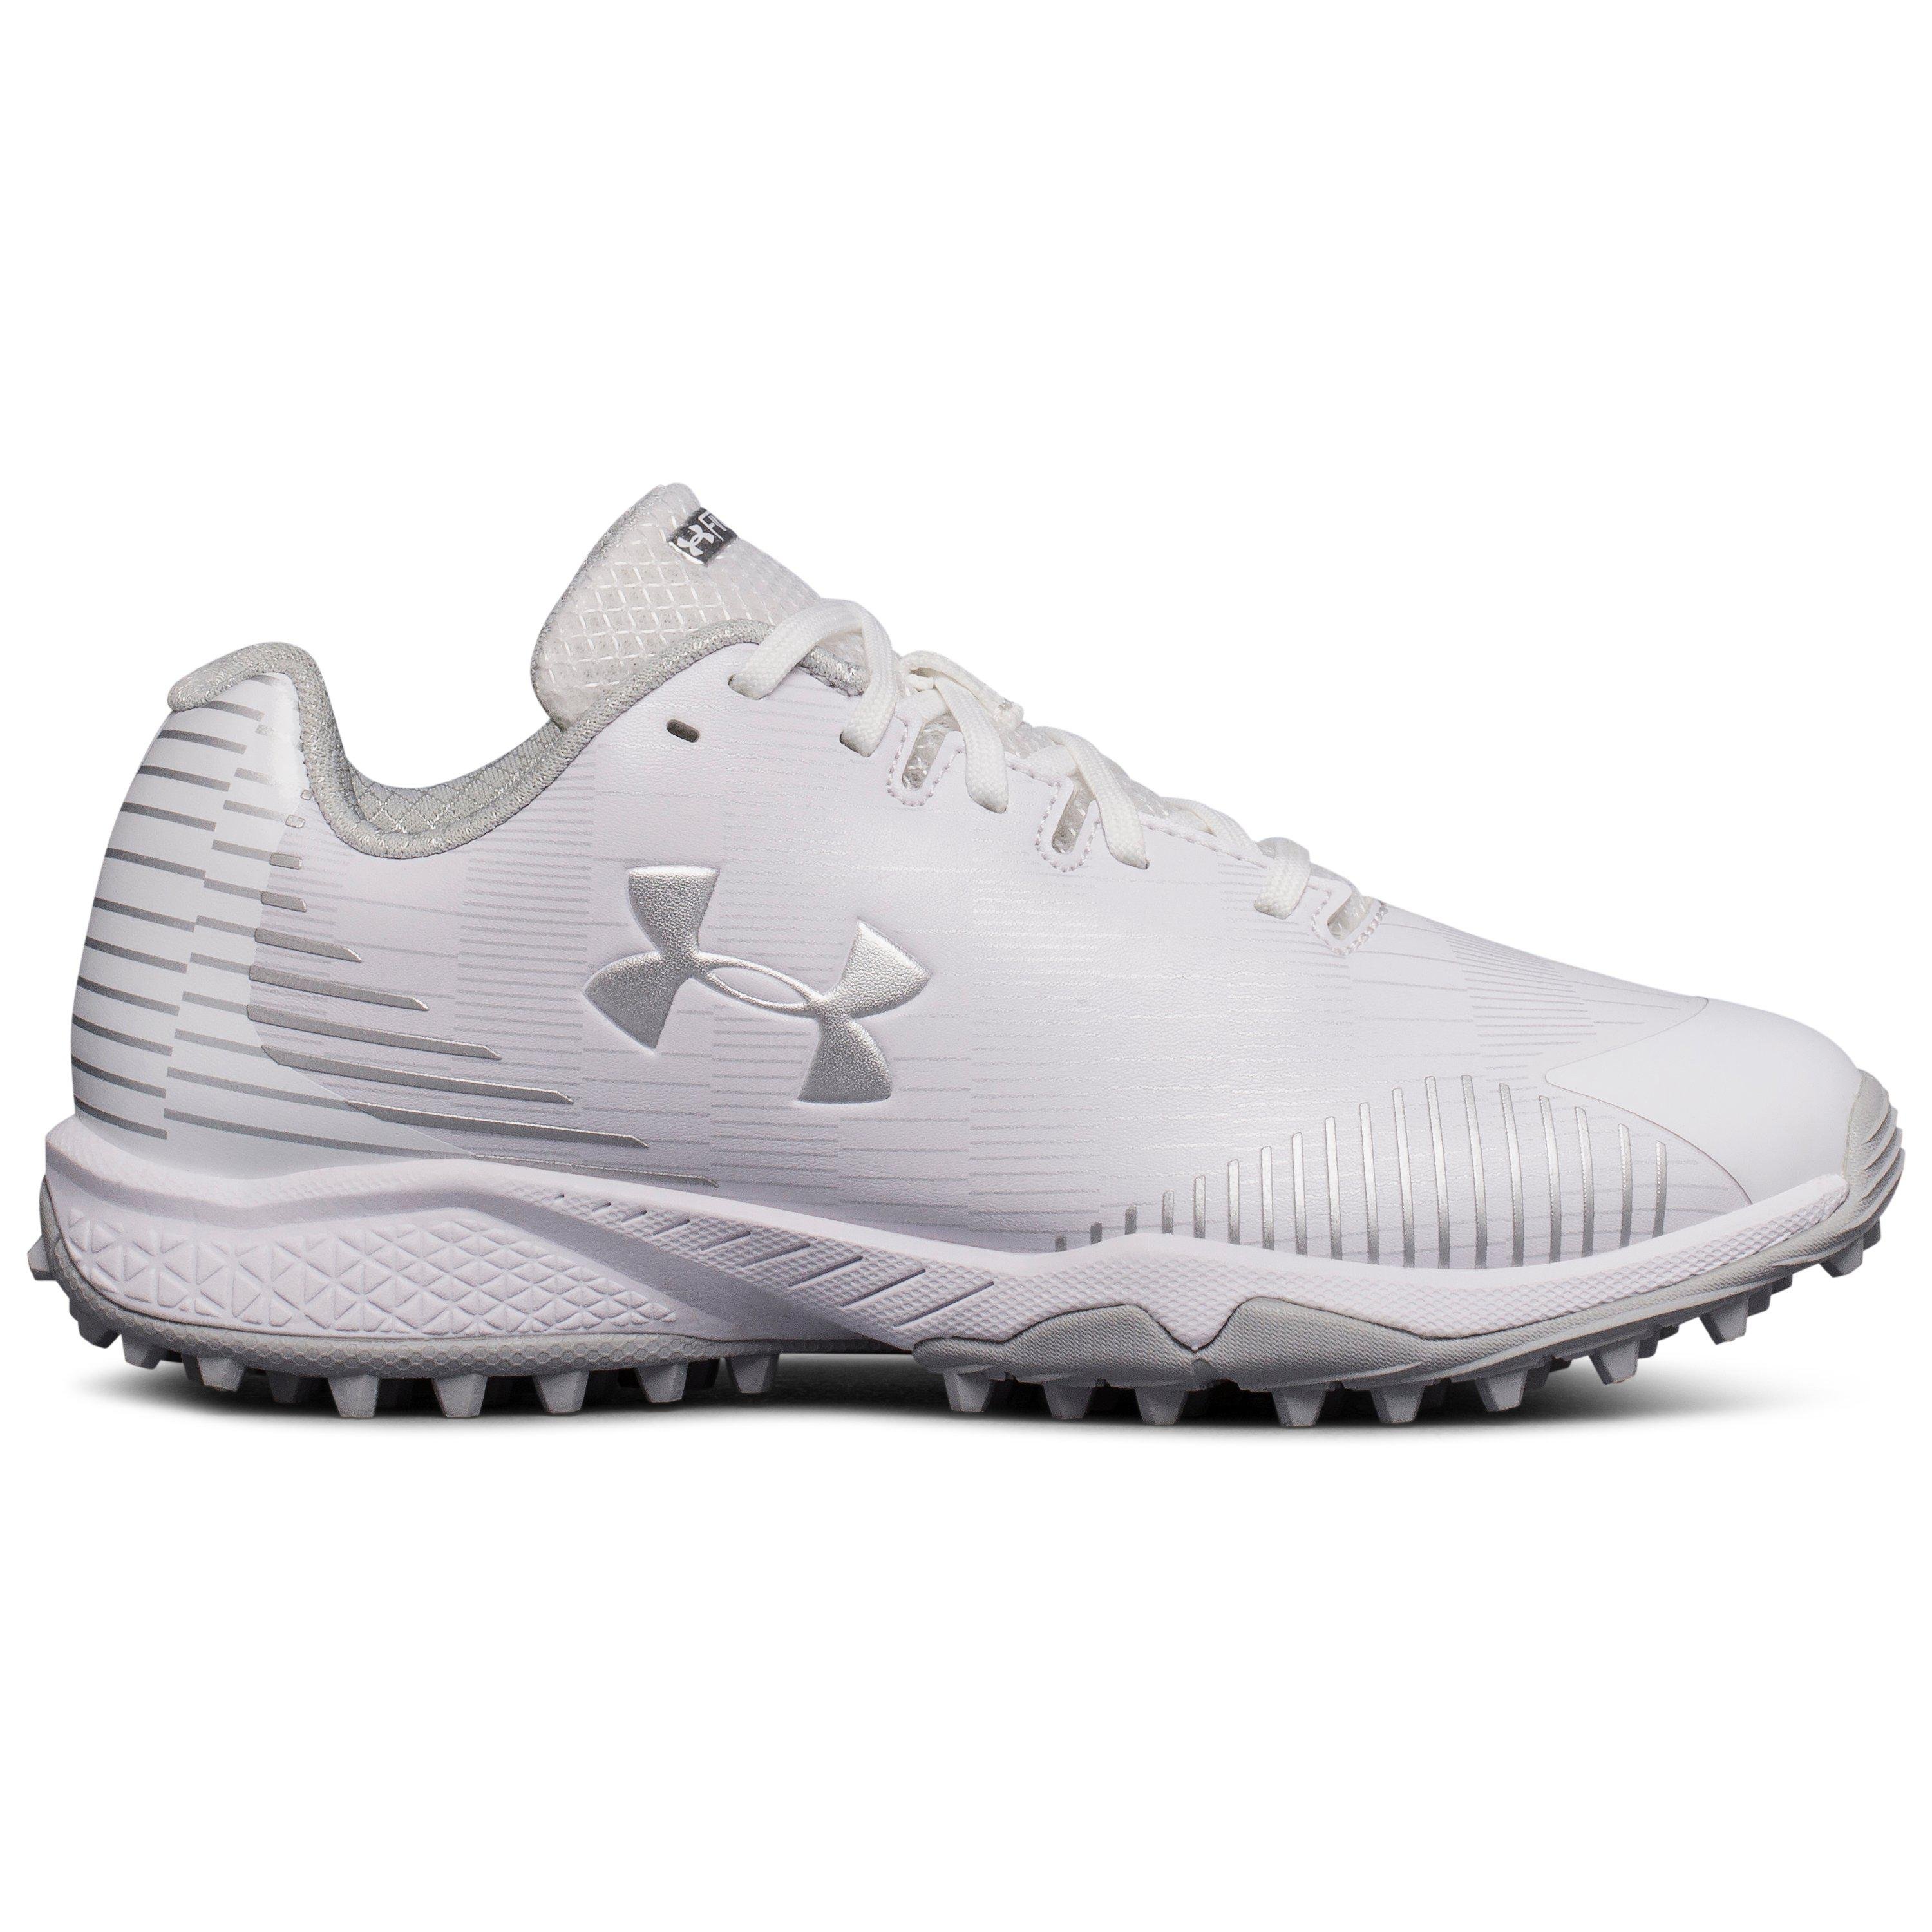 Under Armour Synthetic Women's Ua Finisher Turf Lacrosse